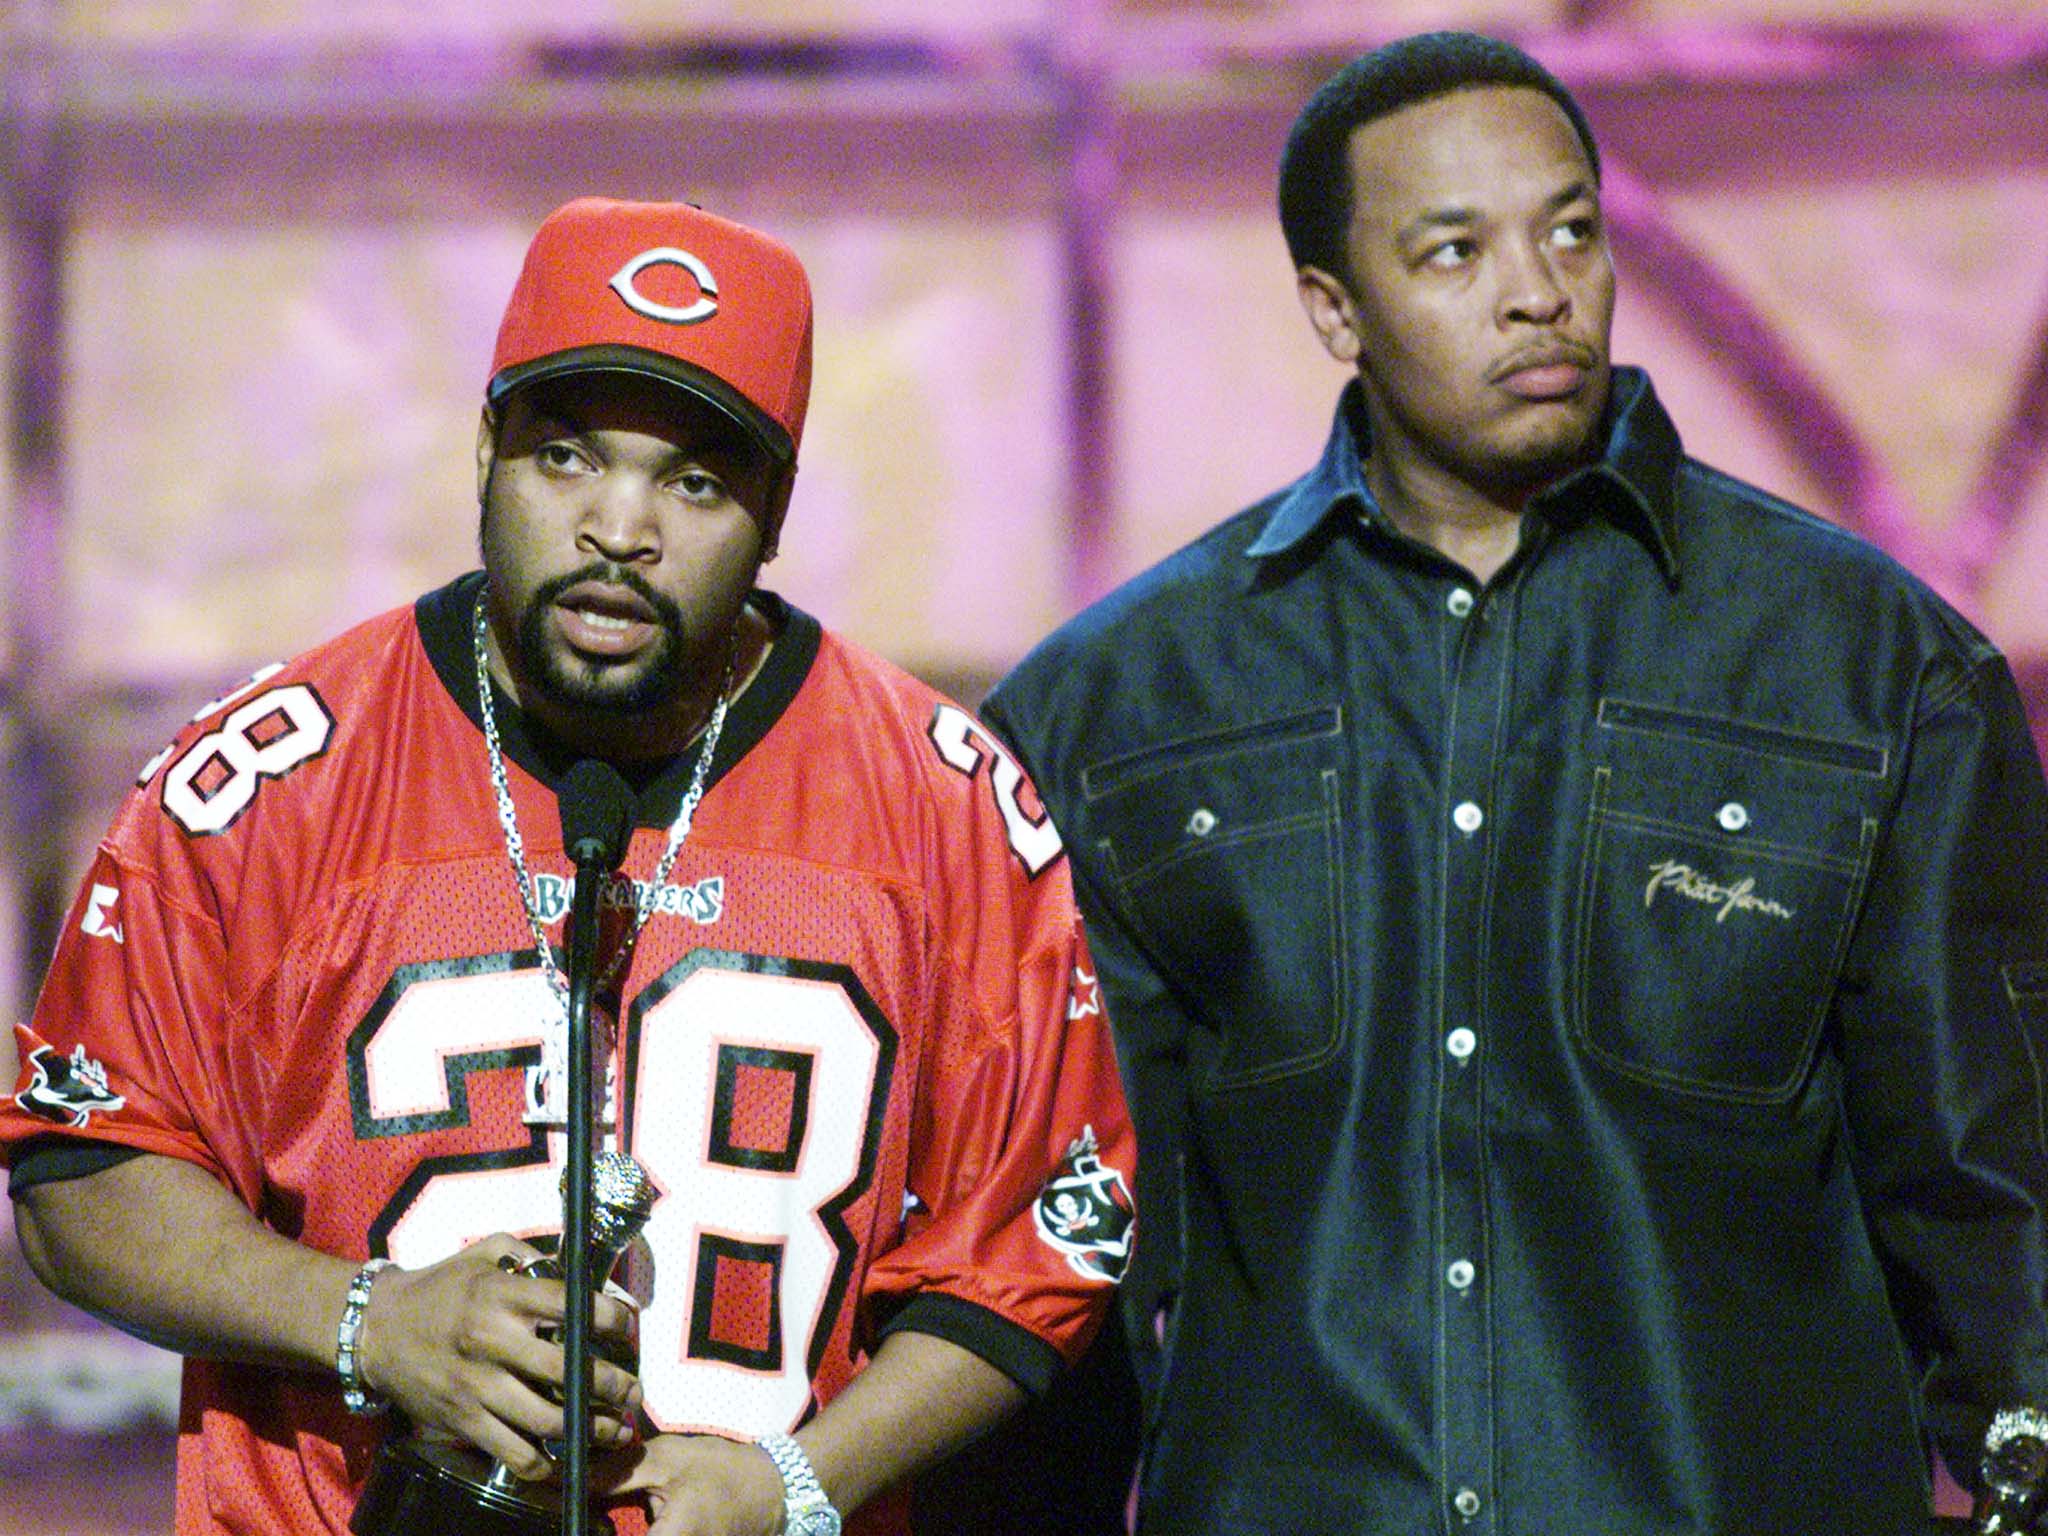 ‘This s*** about to pop’: Cube and Dr Dre at the 2000 Source Awards